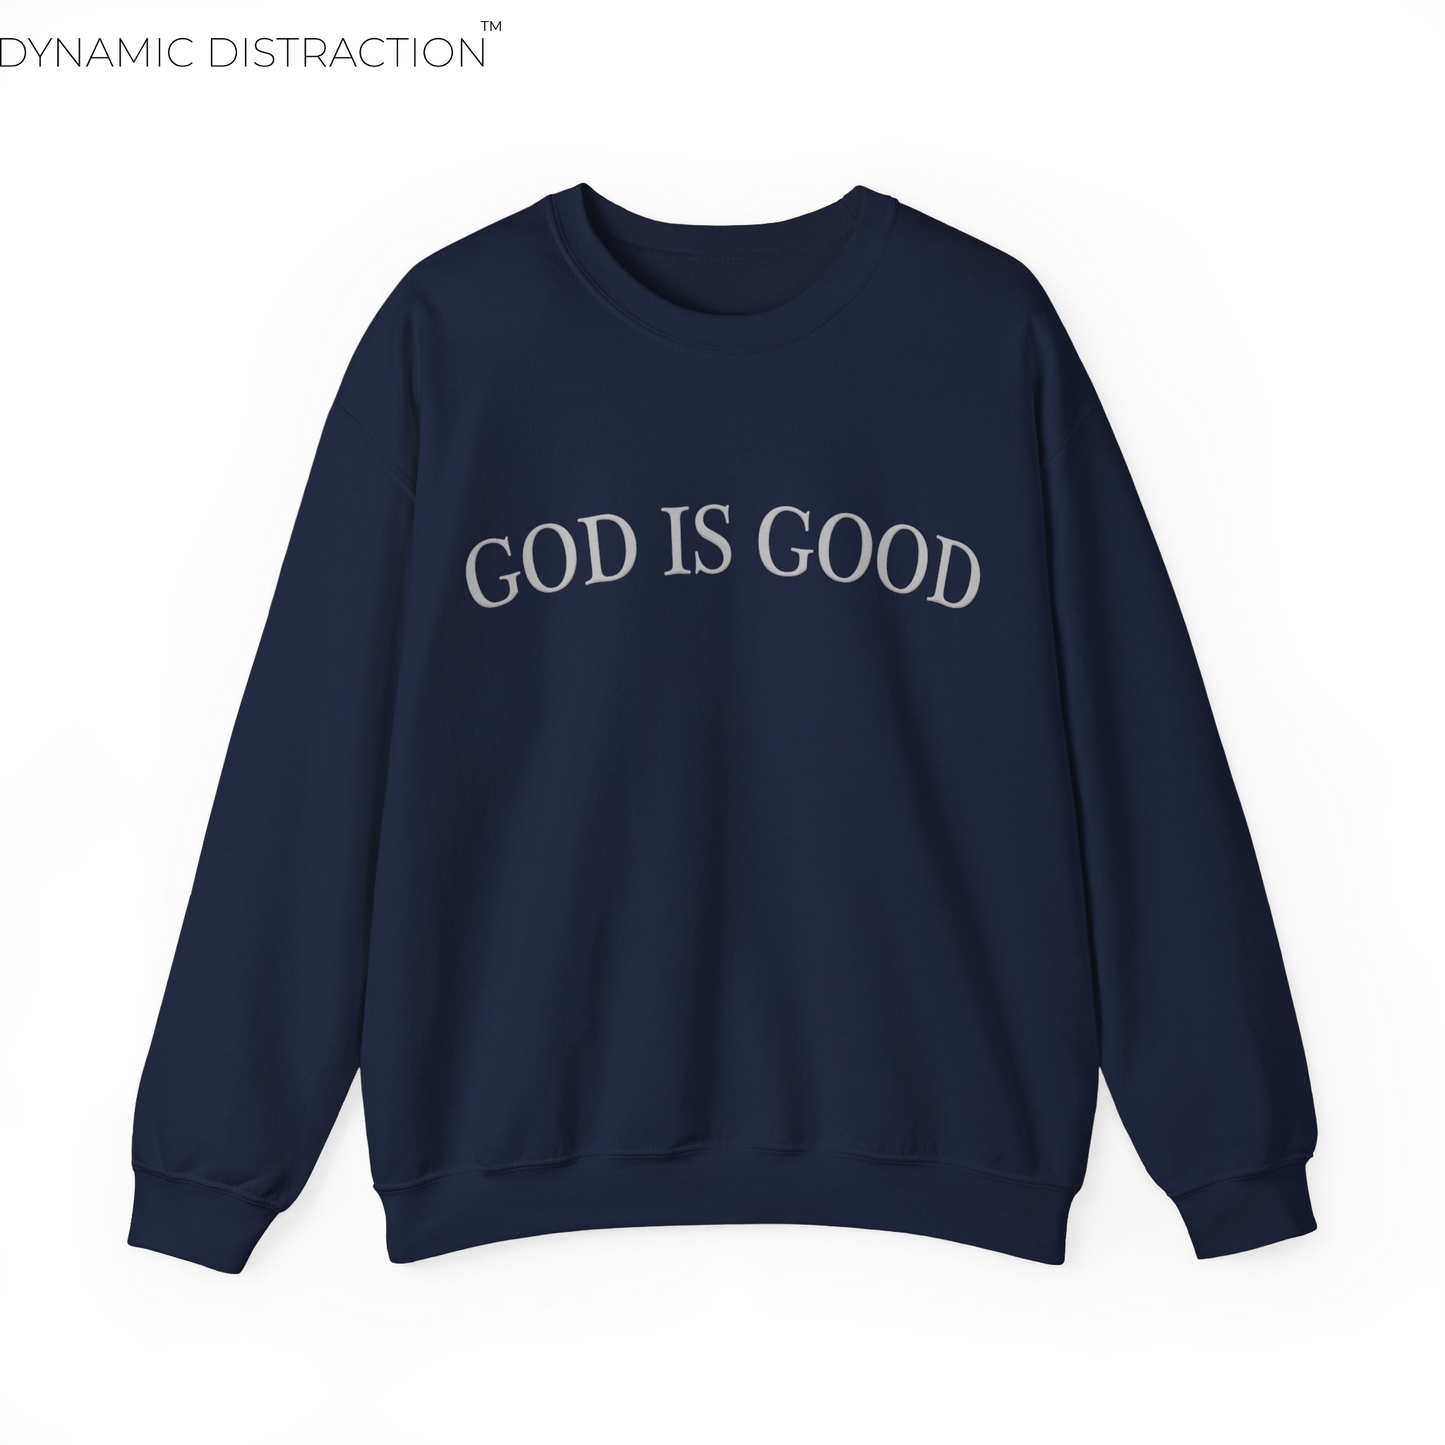 Good is Good Scripture Crewneck For Women, Perfect For Religious Students, Teachers, Perfect Gift For Christian Faith, Catholic School Gift & Faithful Individuals